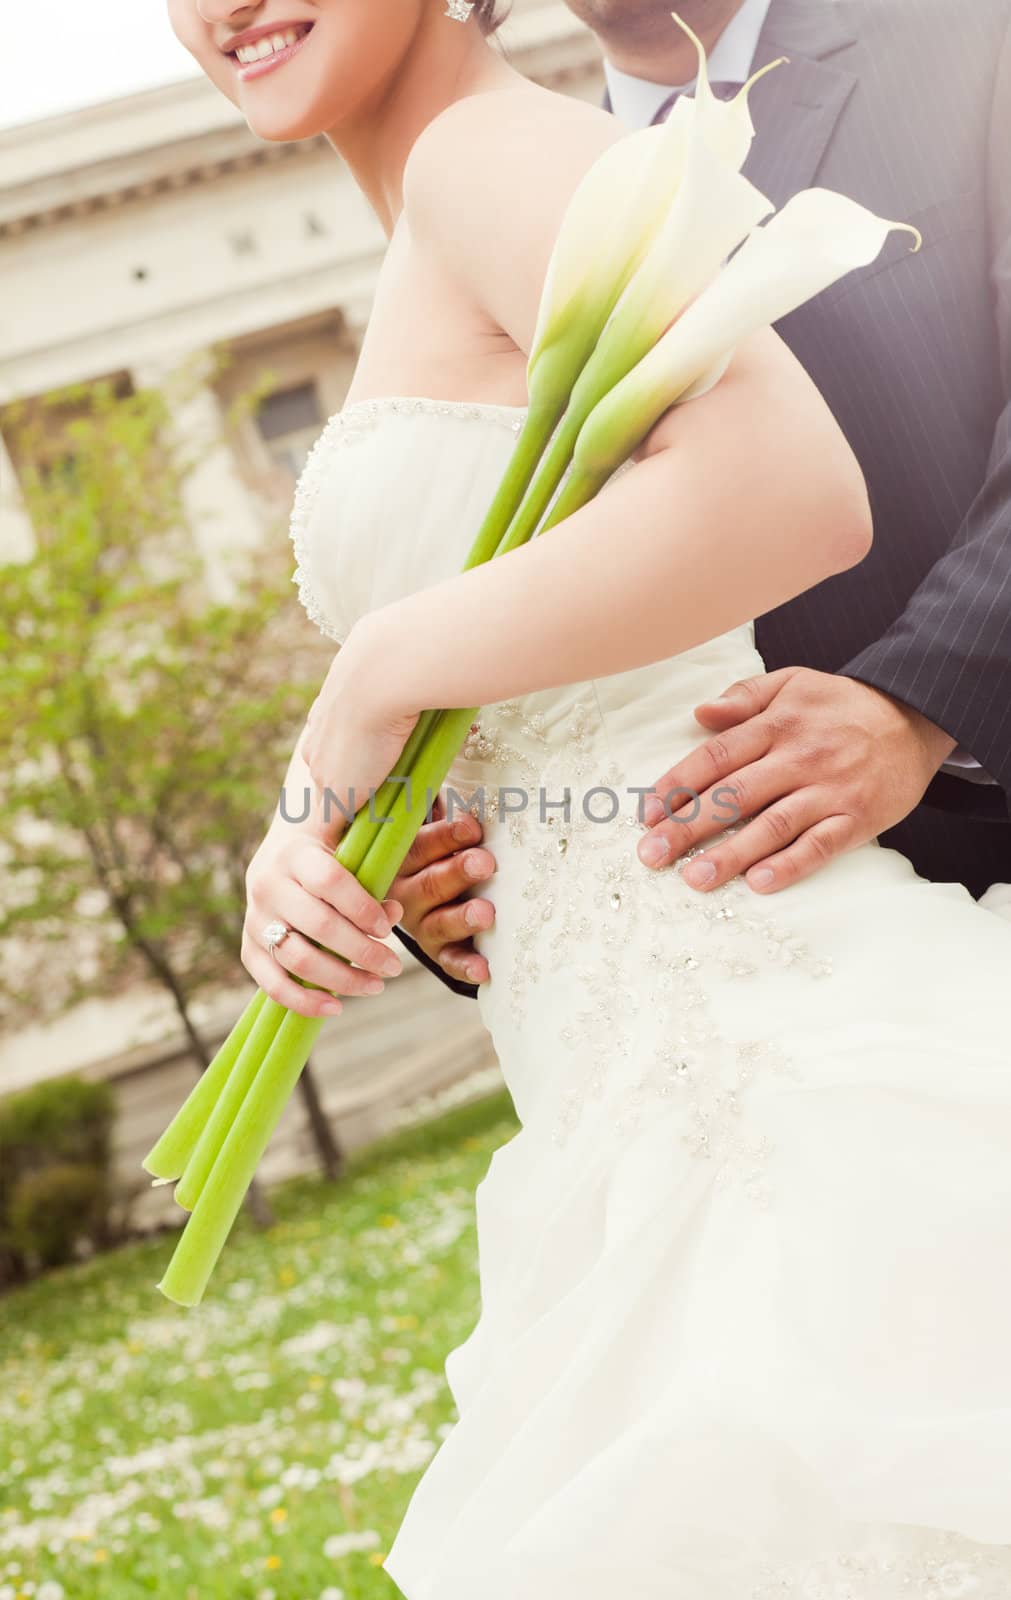 Cropped image of wedding couple embracing, woman holding white calla lilies